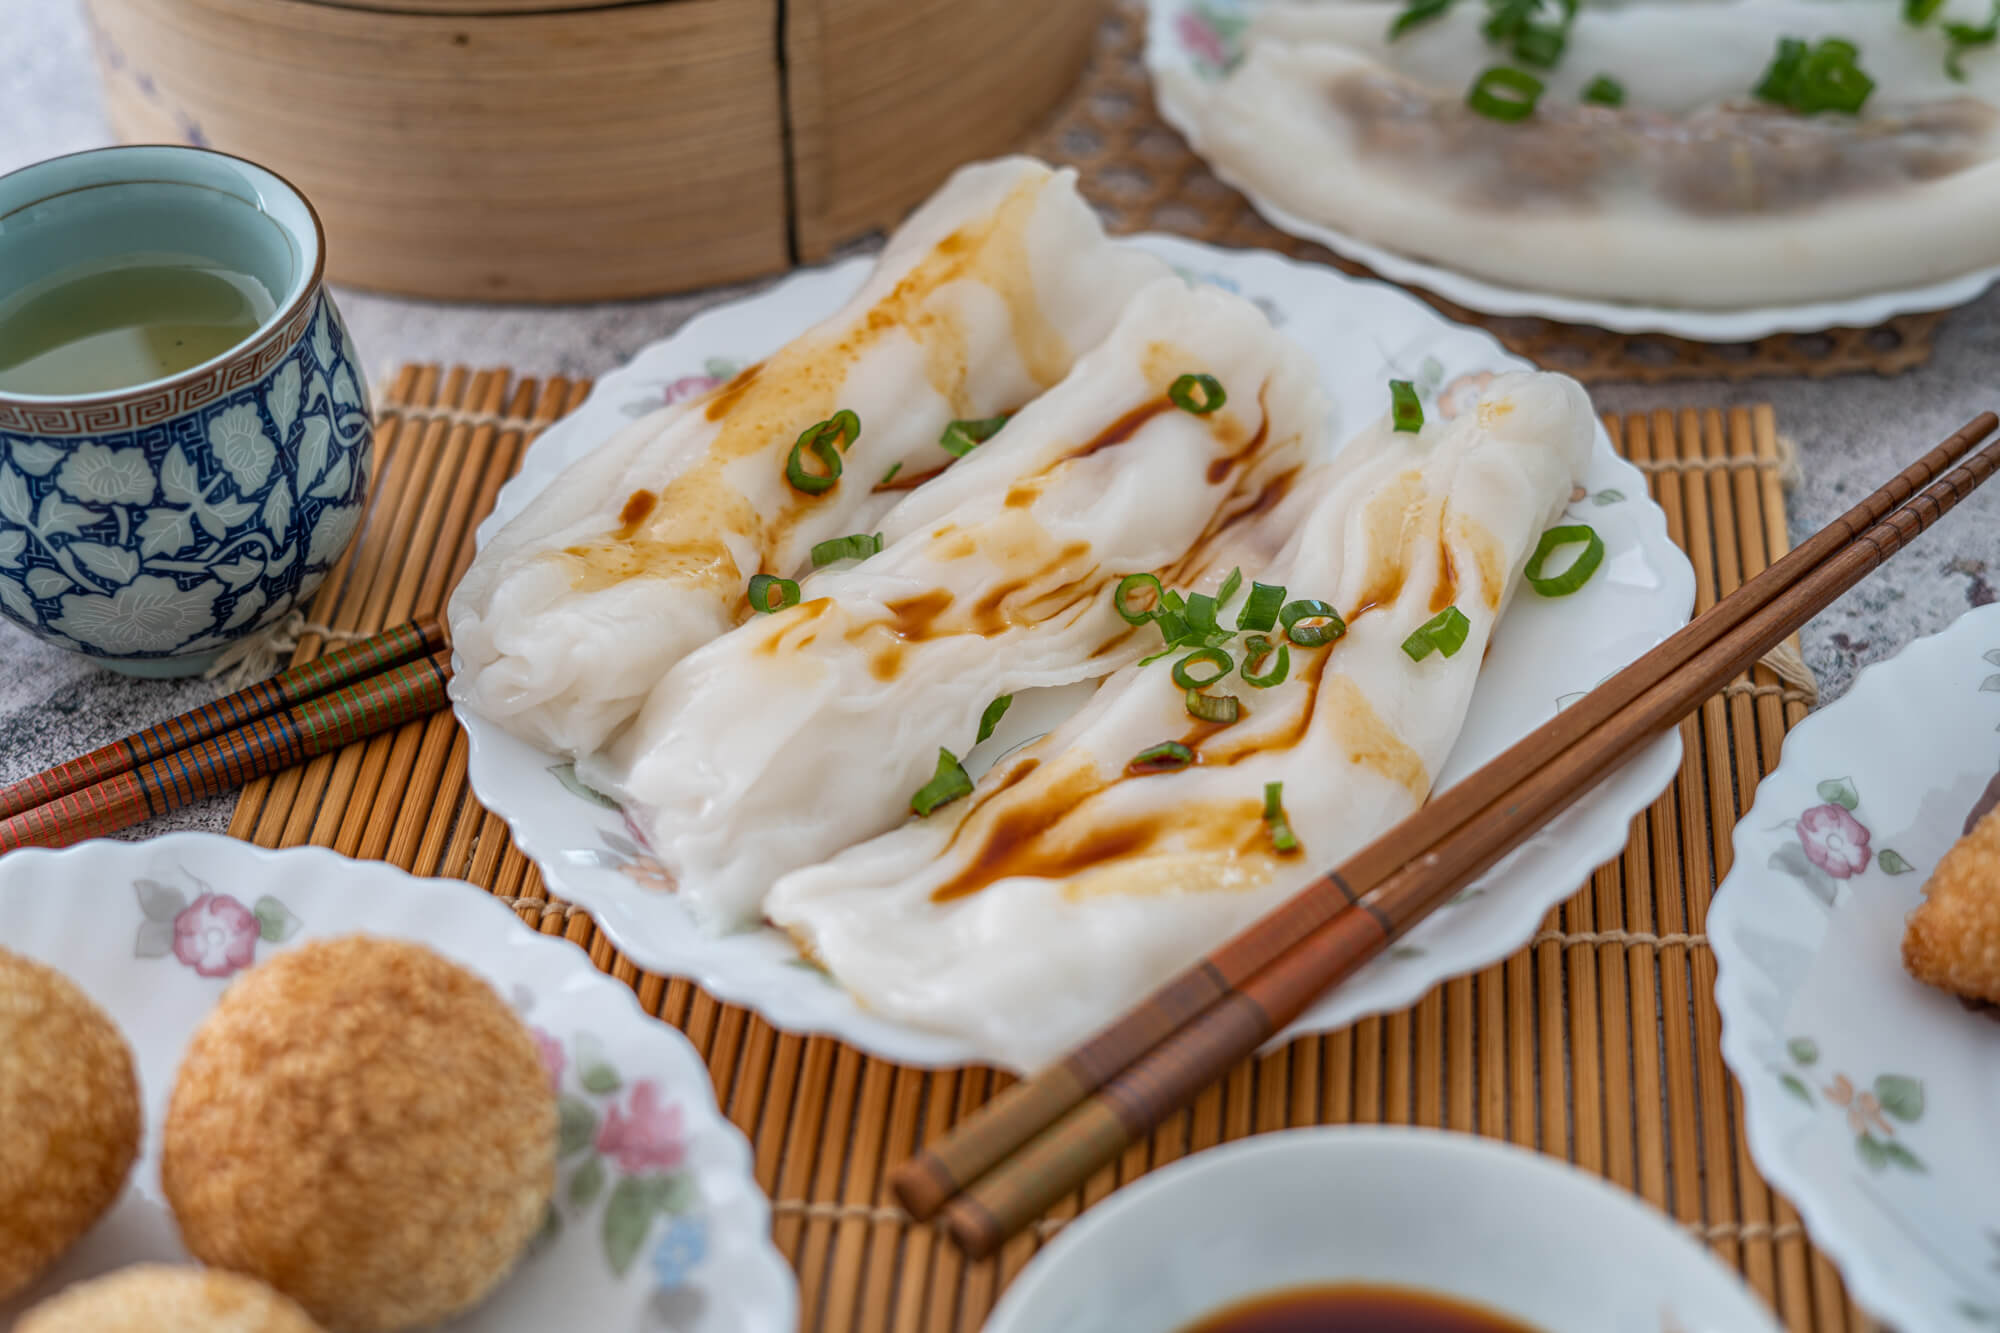 steamed rice rolls with beef (cheung fun) - smelly lunchbox